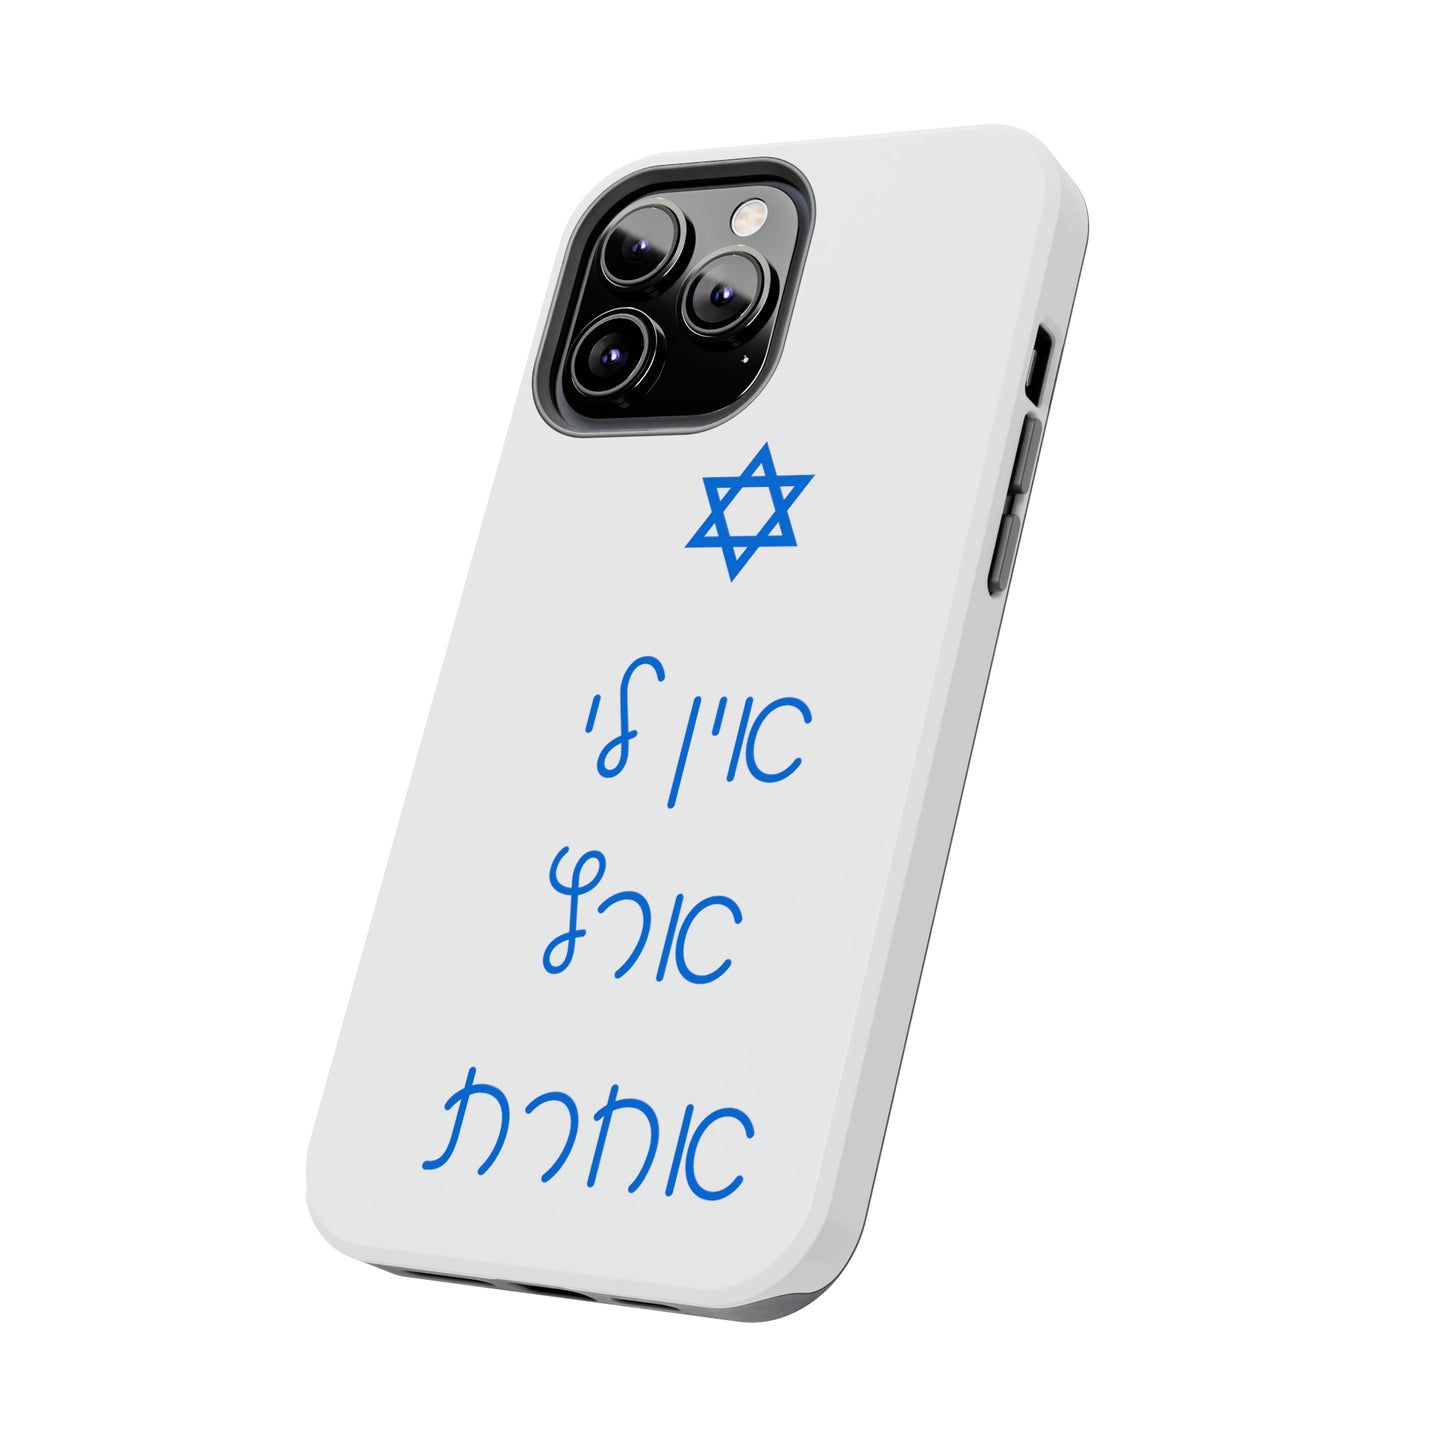 "No Other Country" Hebrew Motto iPhone Case